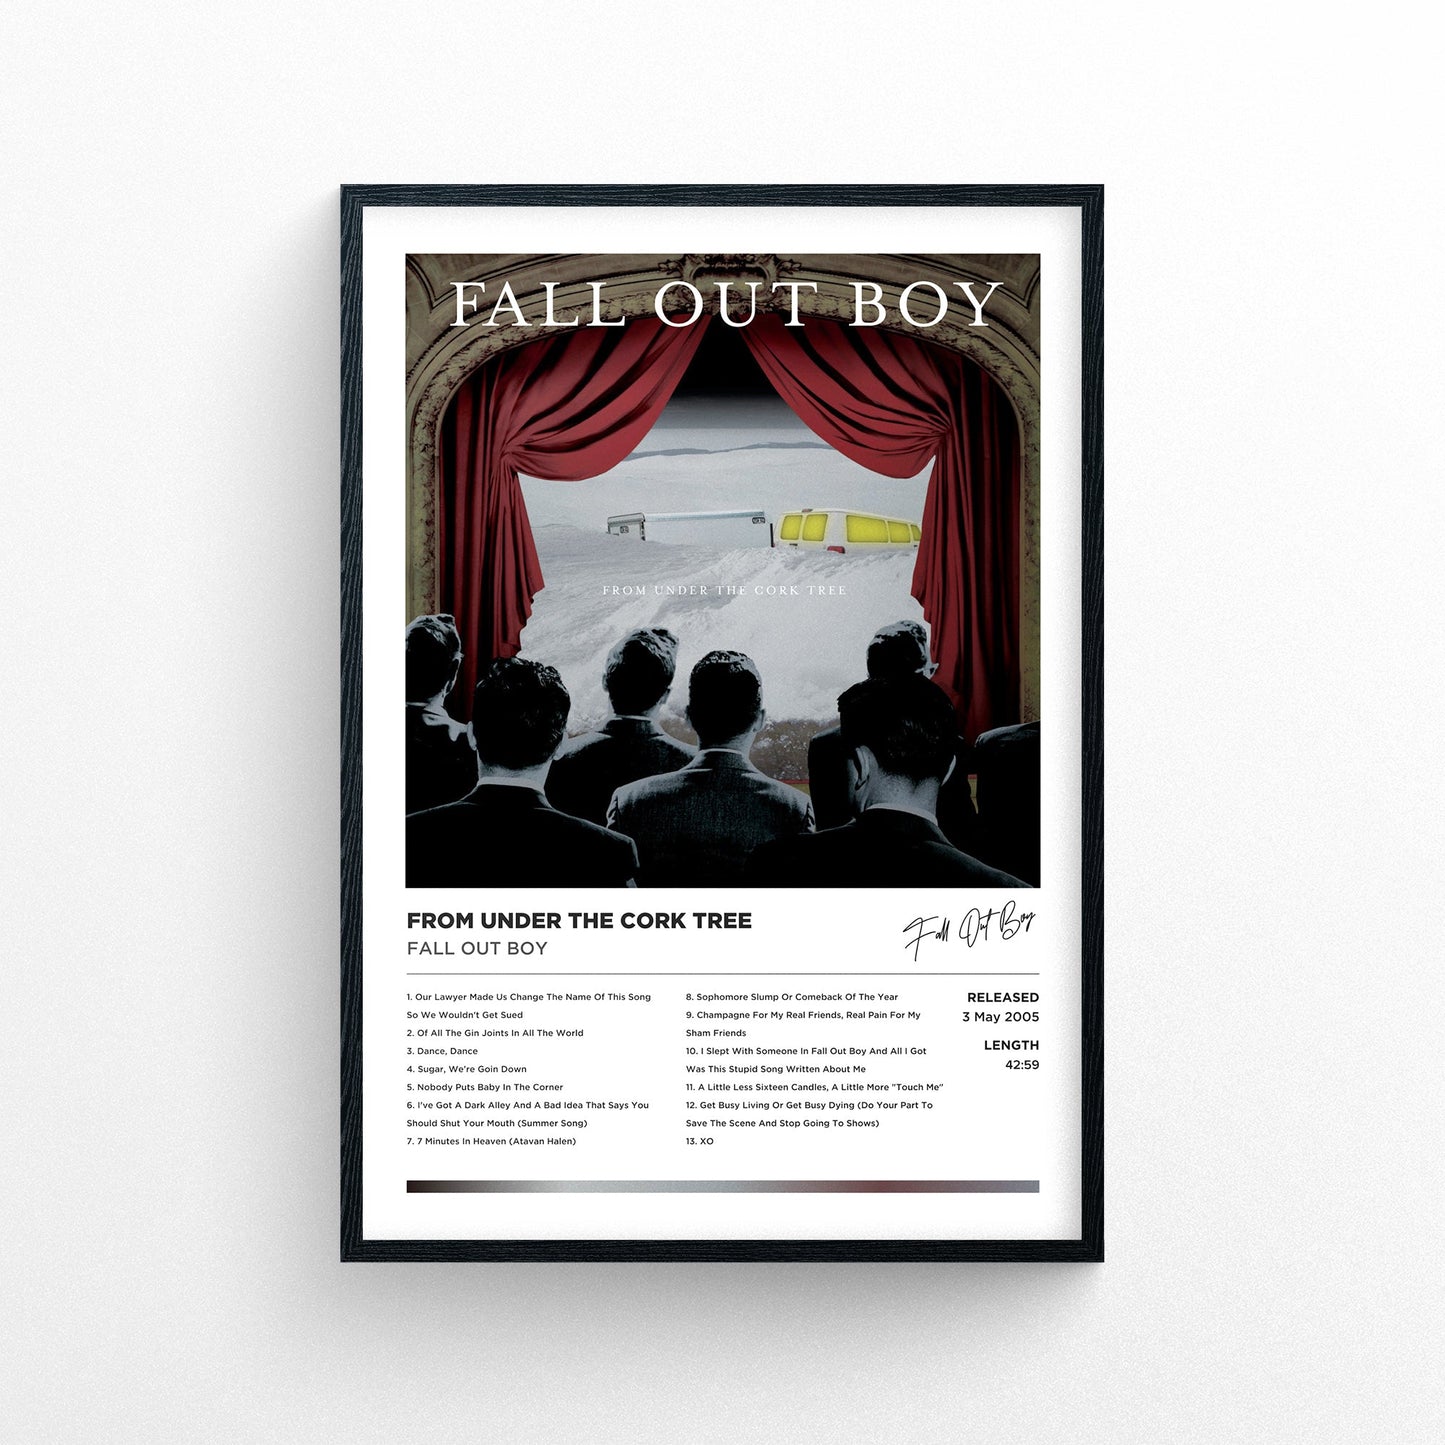 Fall Out Boy - From Under The Cork Tree Framed Poster Print | Polaroid Style | Album Cover Artwork